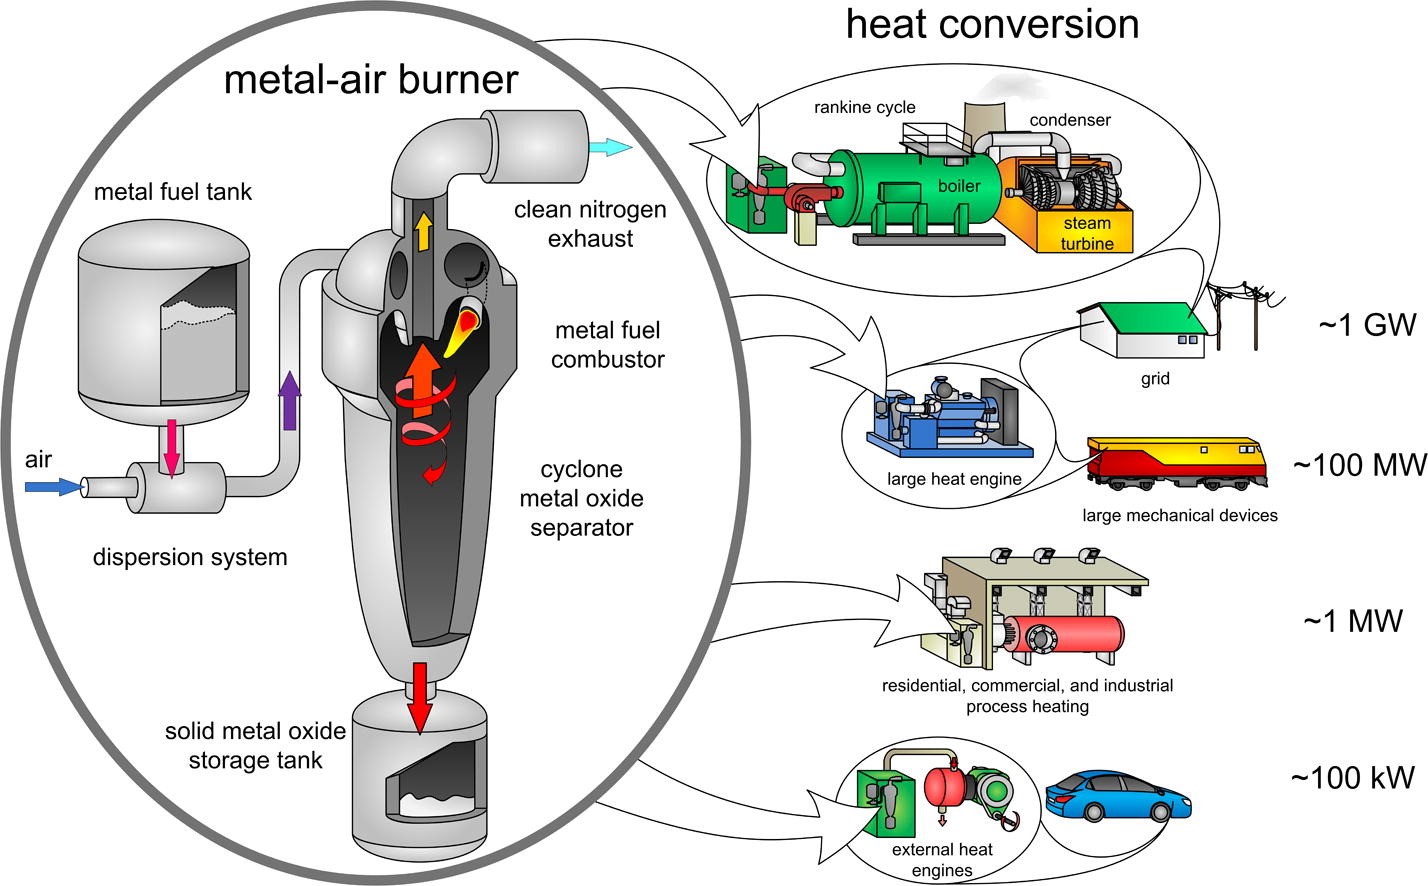 Metal-fuel burner and engine concept for various heat and power applications